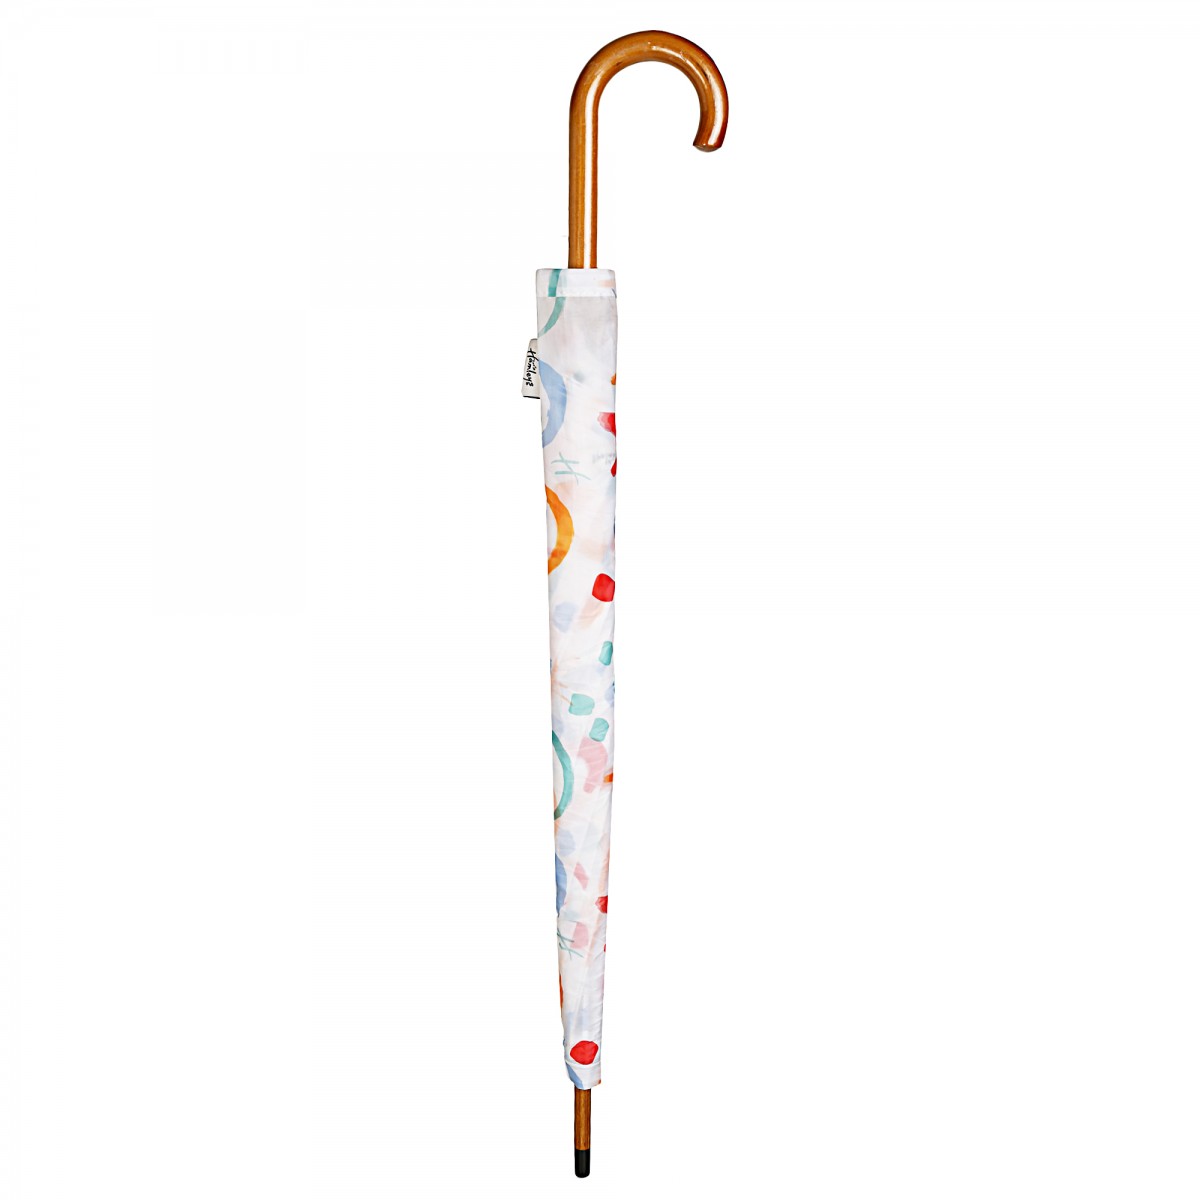 Hamleys London Rainbow Print 28 inches Single Fold Rain Umbrella with Wooden Bend Handle and Auto Open Long Umbrellas, Kids for 5Y+, White